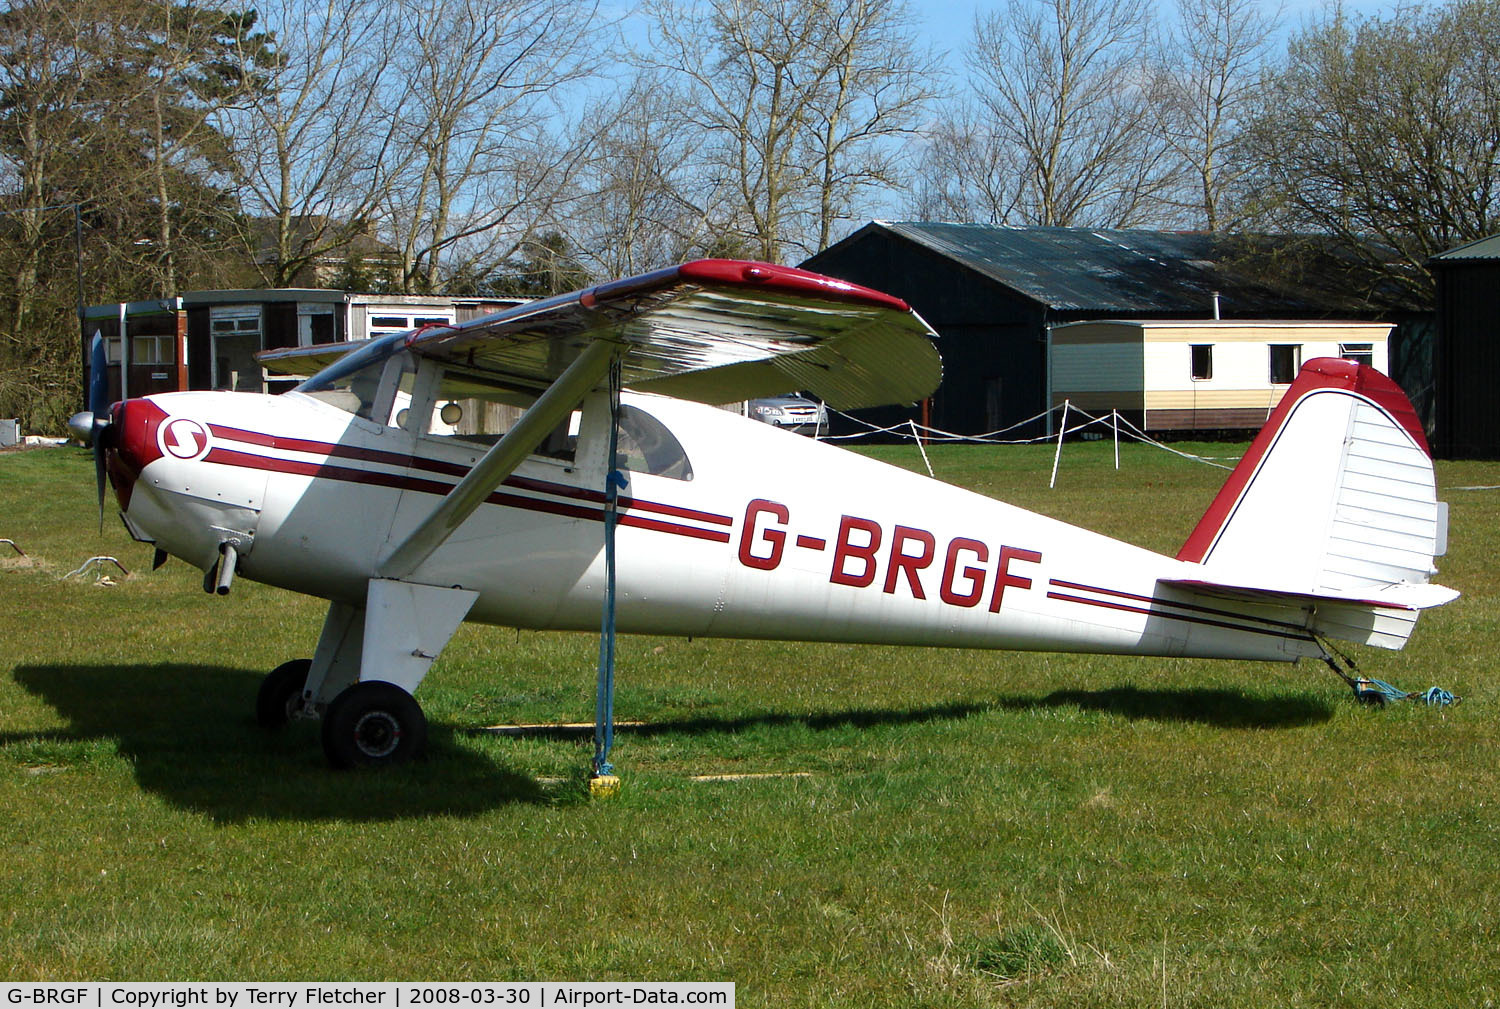 G-BRGF, 1947 Luscombe 8E Silvaire C/N 5475, Based aircraft at the quaintly named Hinton-in-the-Hedges airfield